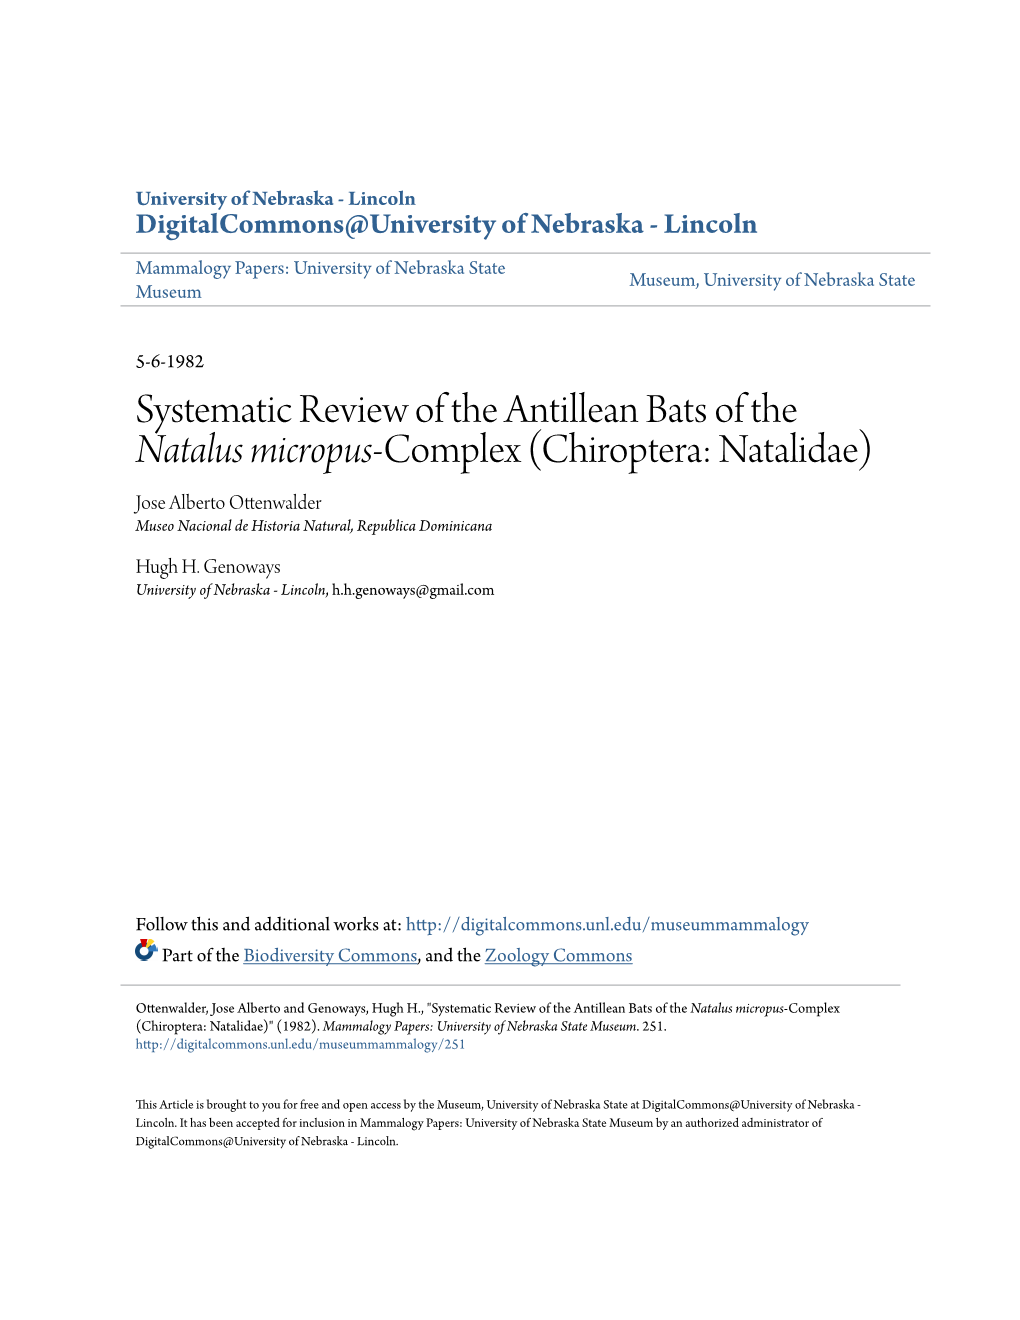 Systematic Review of the Antillean Bats of the Natalus Micropus